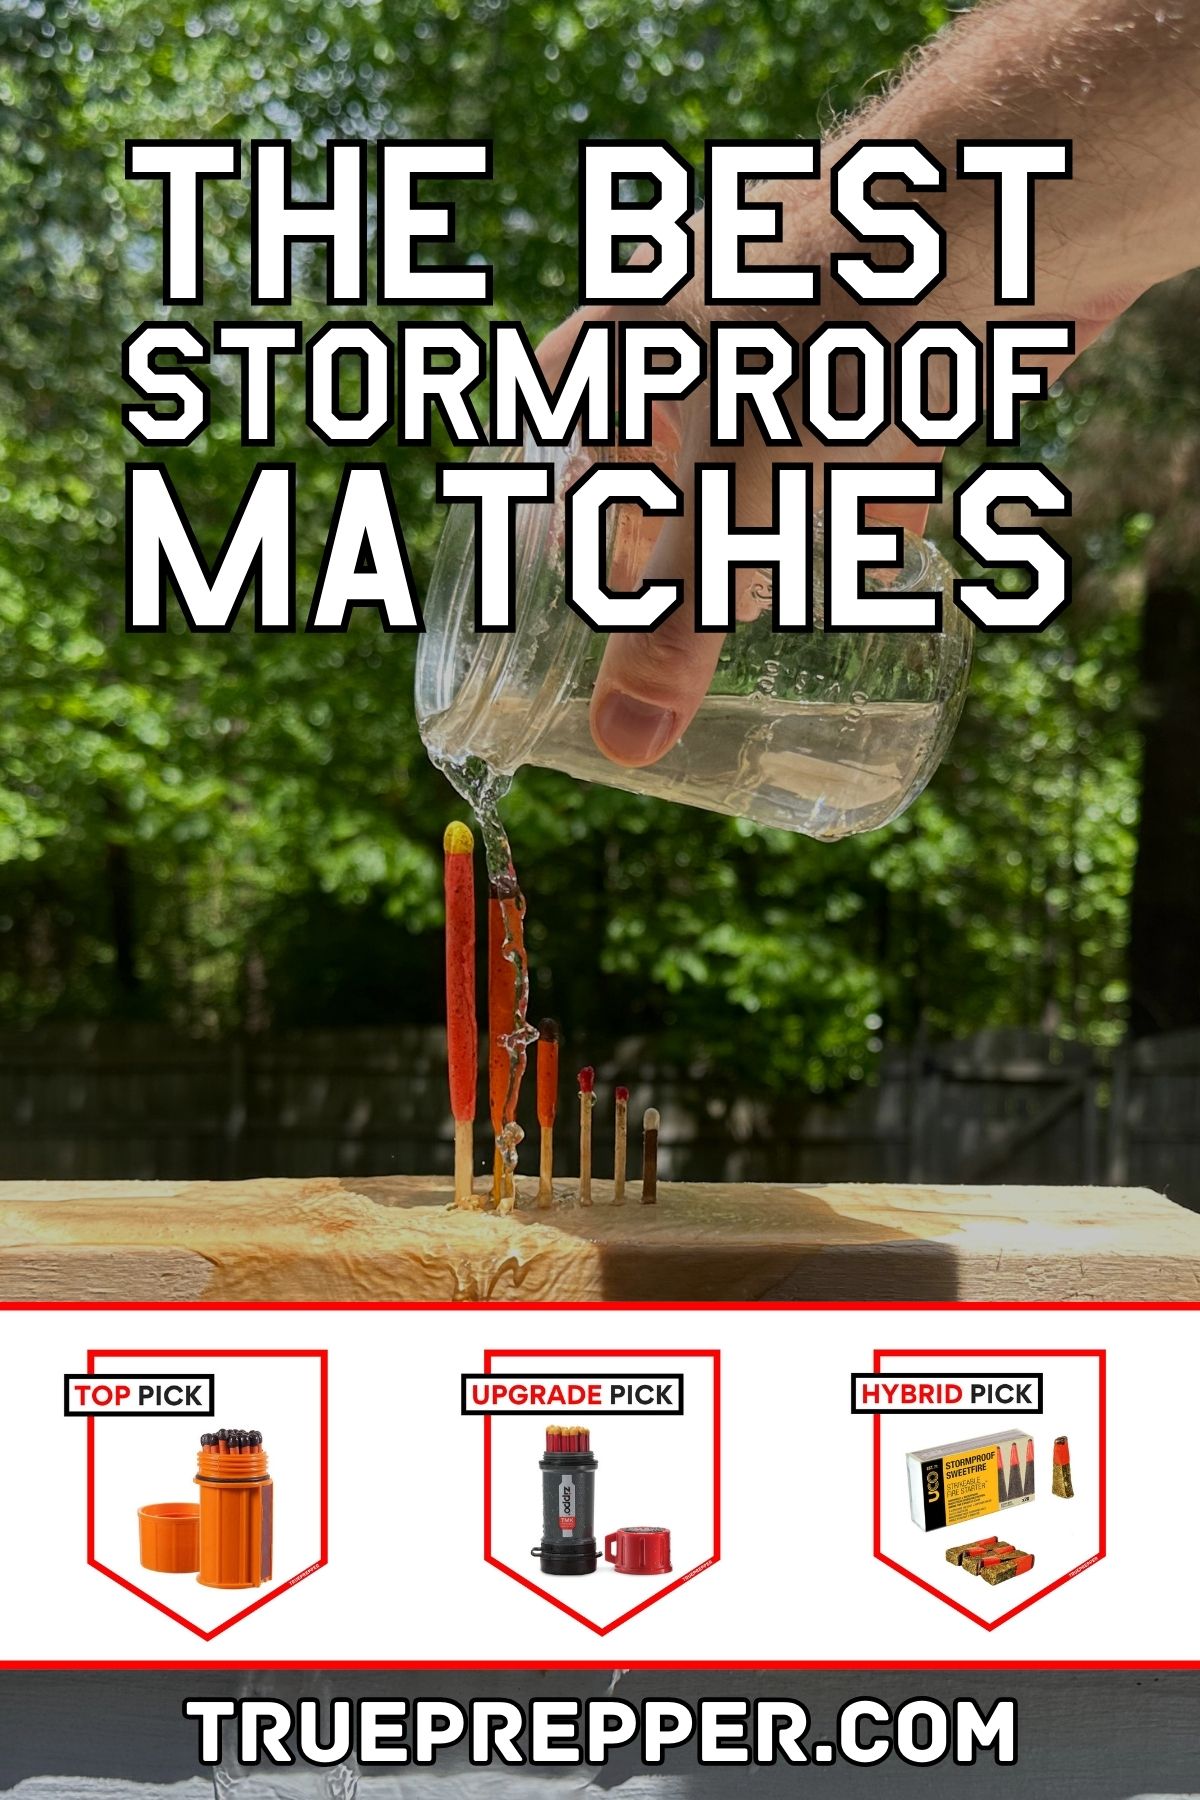 The Best Stormproof Matches